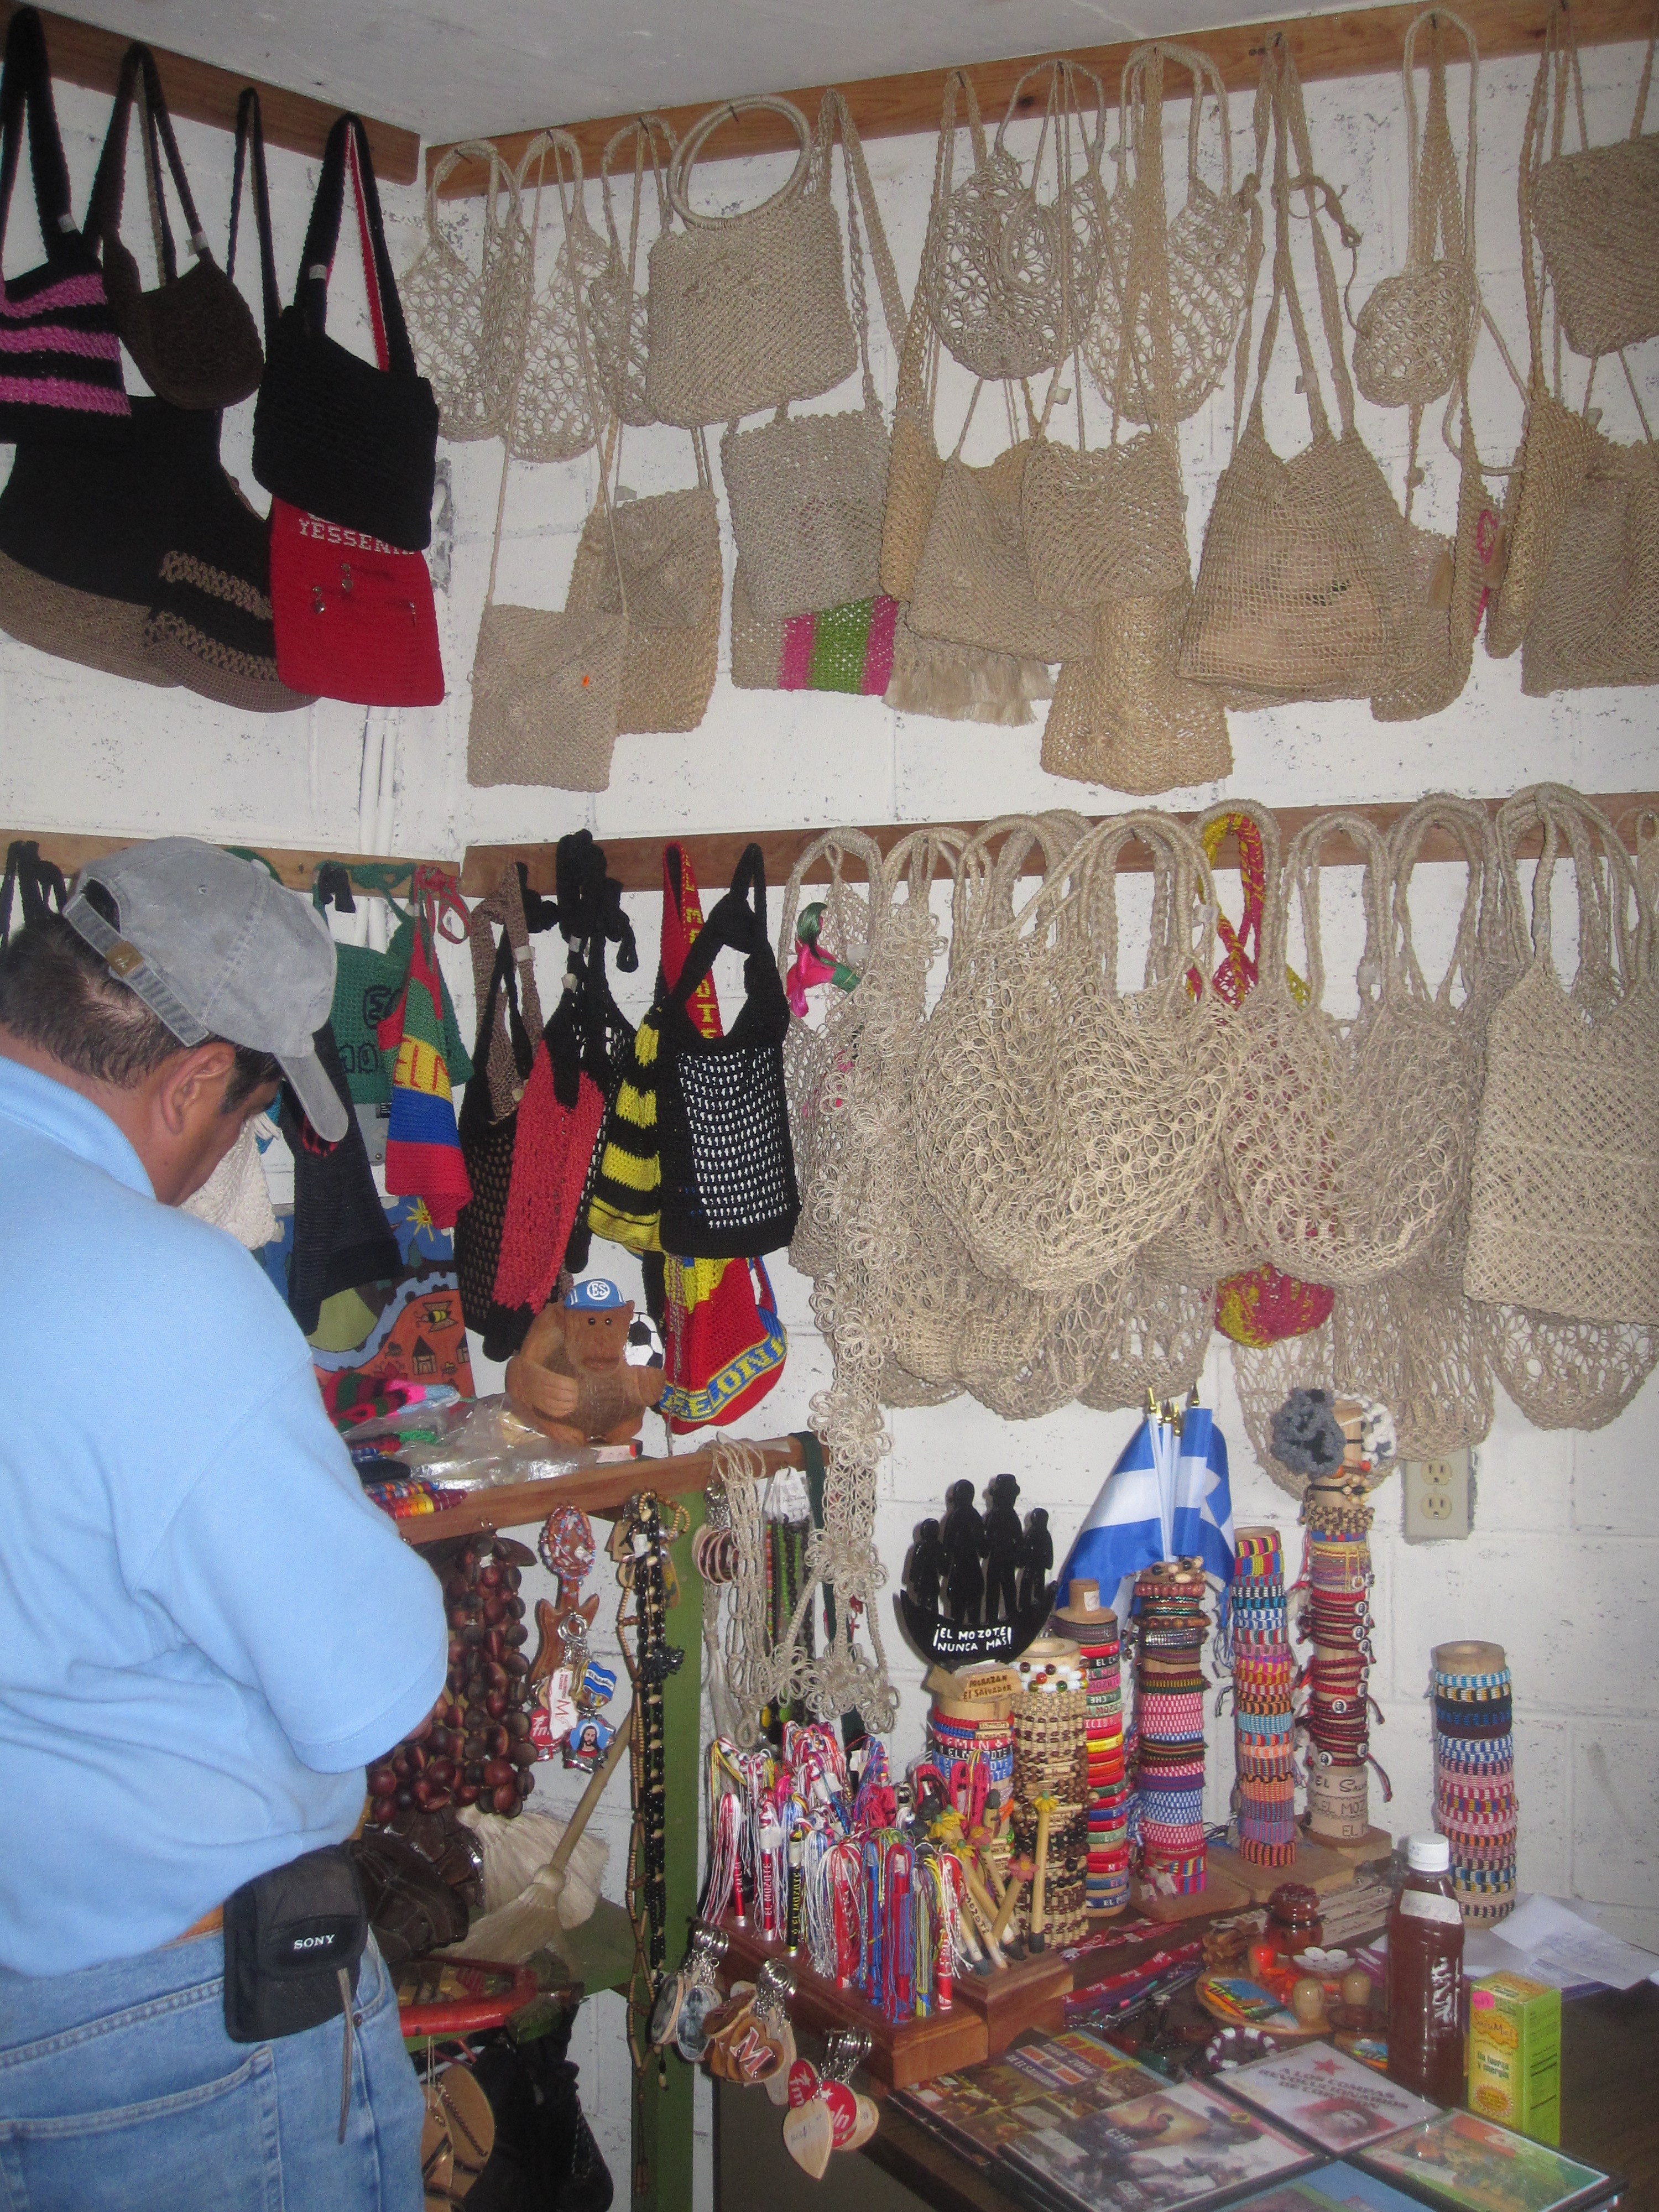 handicrafts displayed for sale in a store assisted by the activity